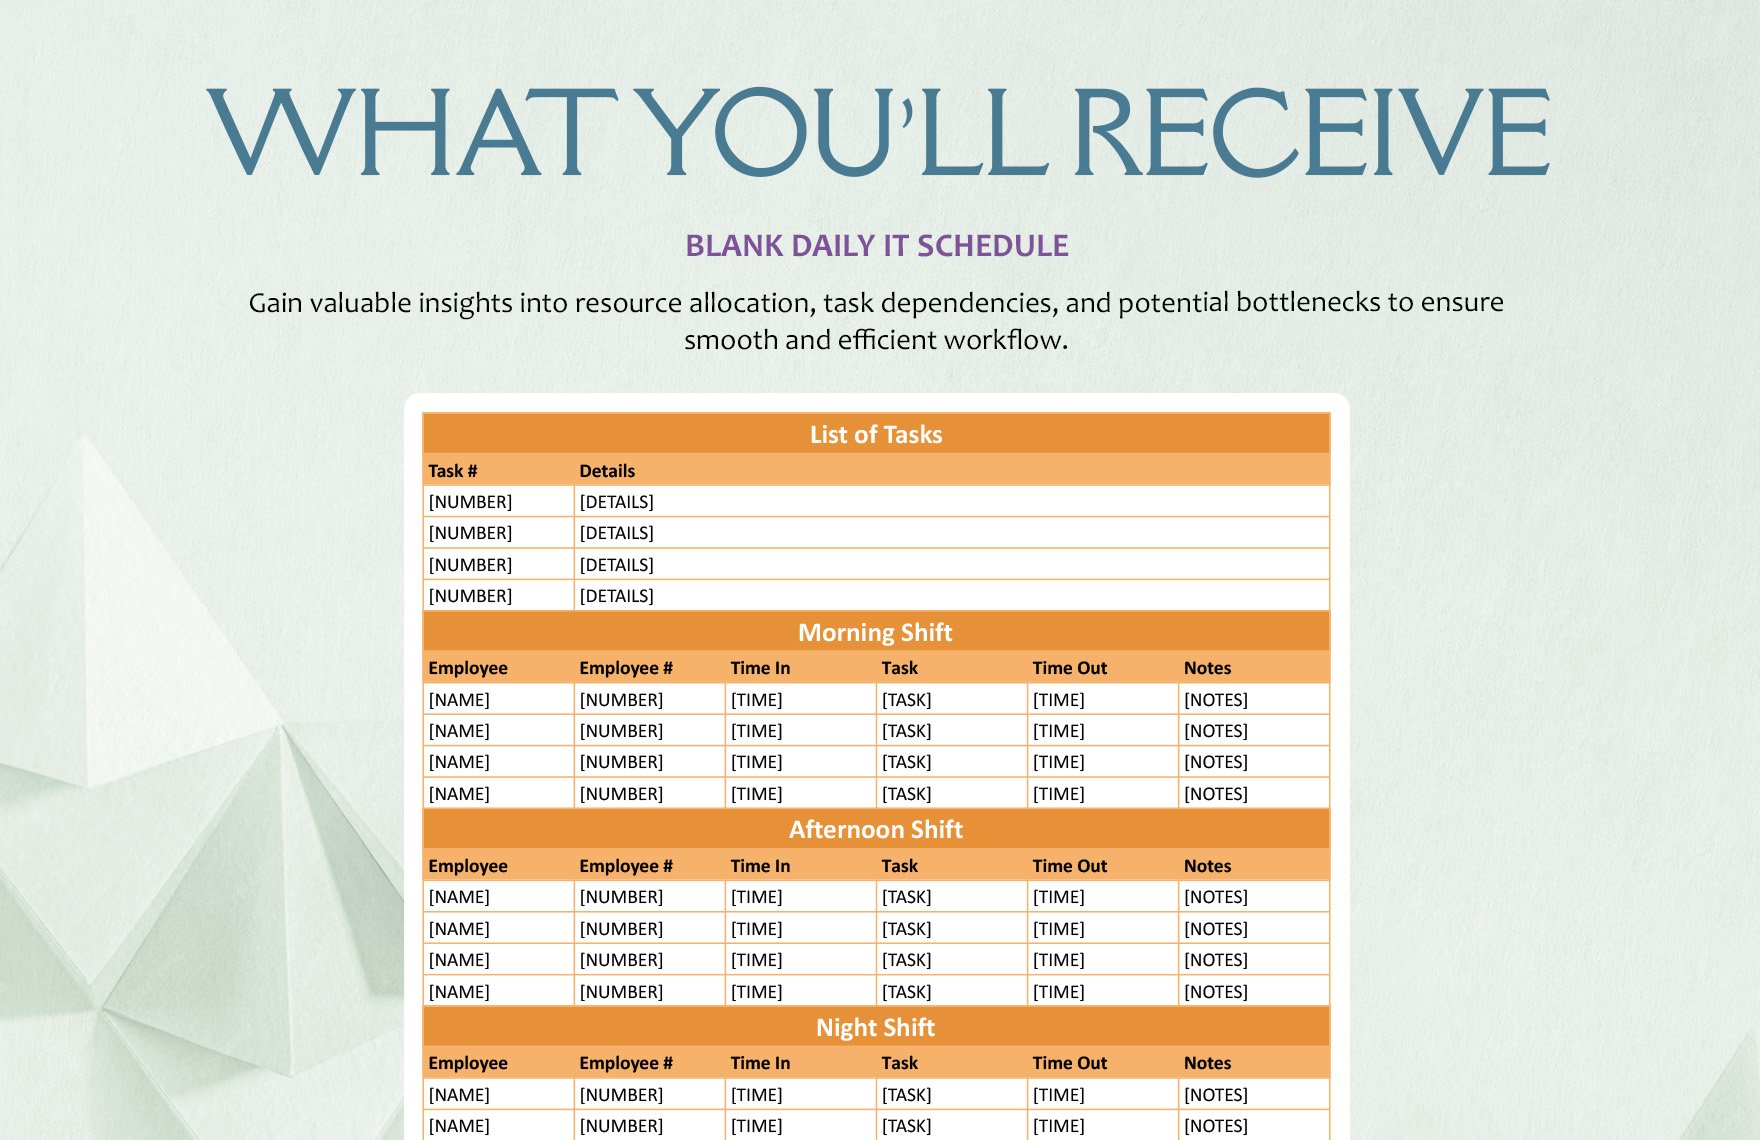 Blank Daily IT Schedule Template